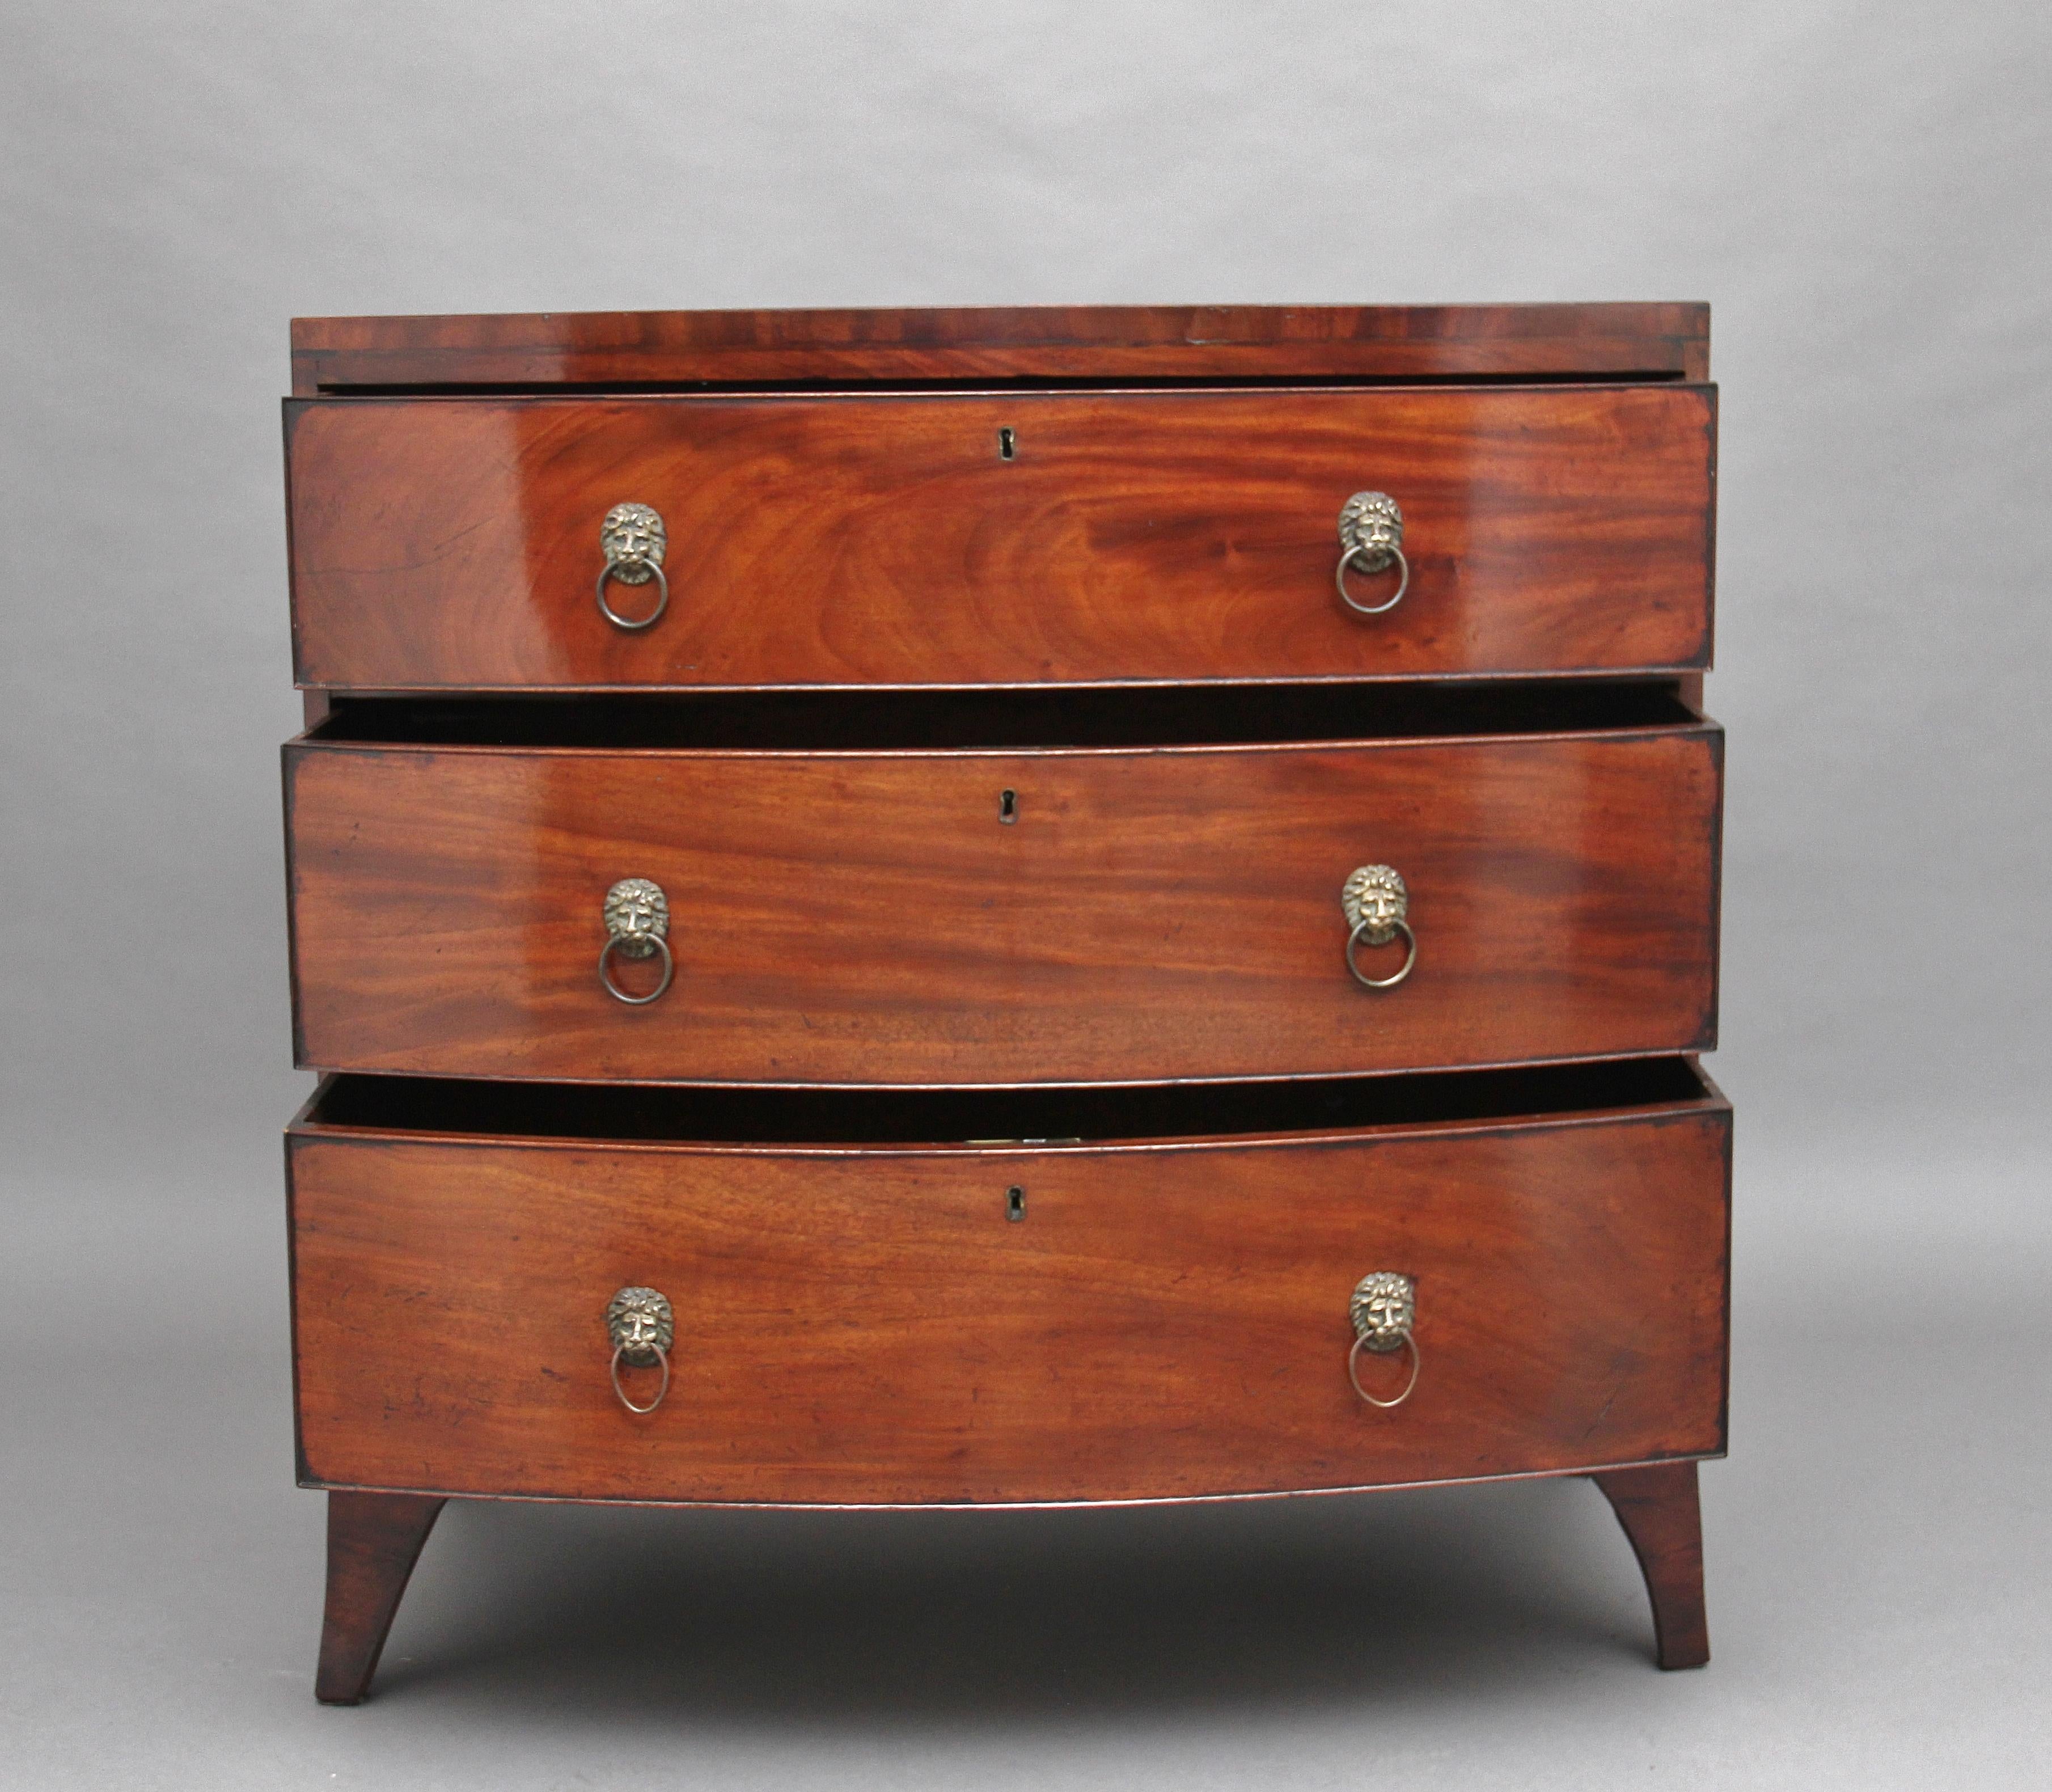 Early 19th century mahogany bowfront chest of drawers of good proportions, the bowfronted top above three oak lined, graduated drawers with original brass lion head / ring pull handles, supported on elegant splay feet, circa 1820.